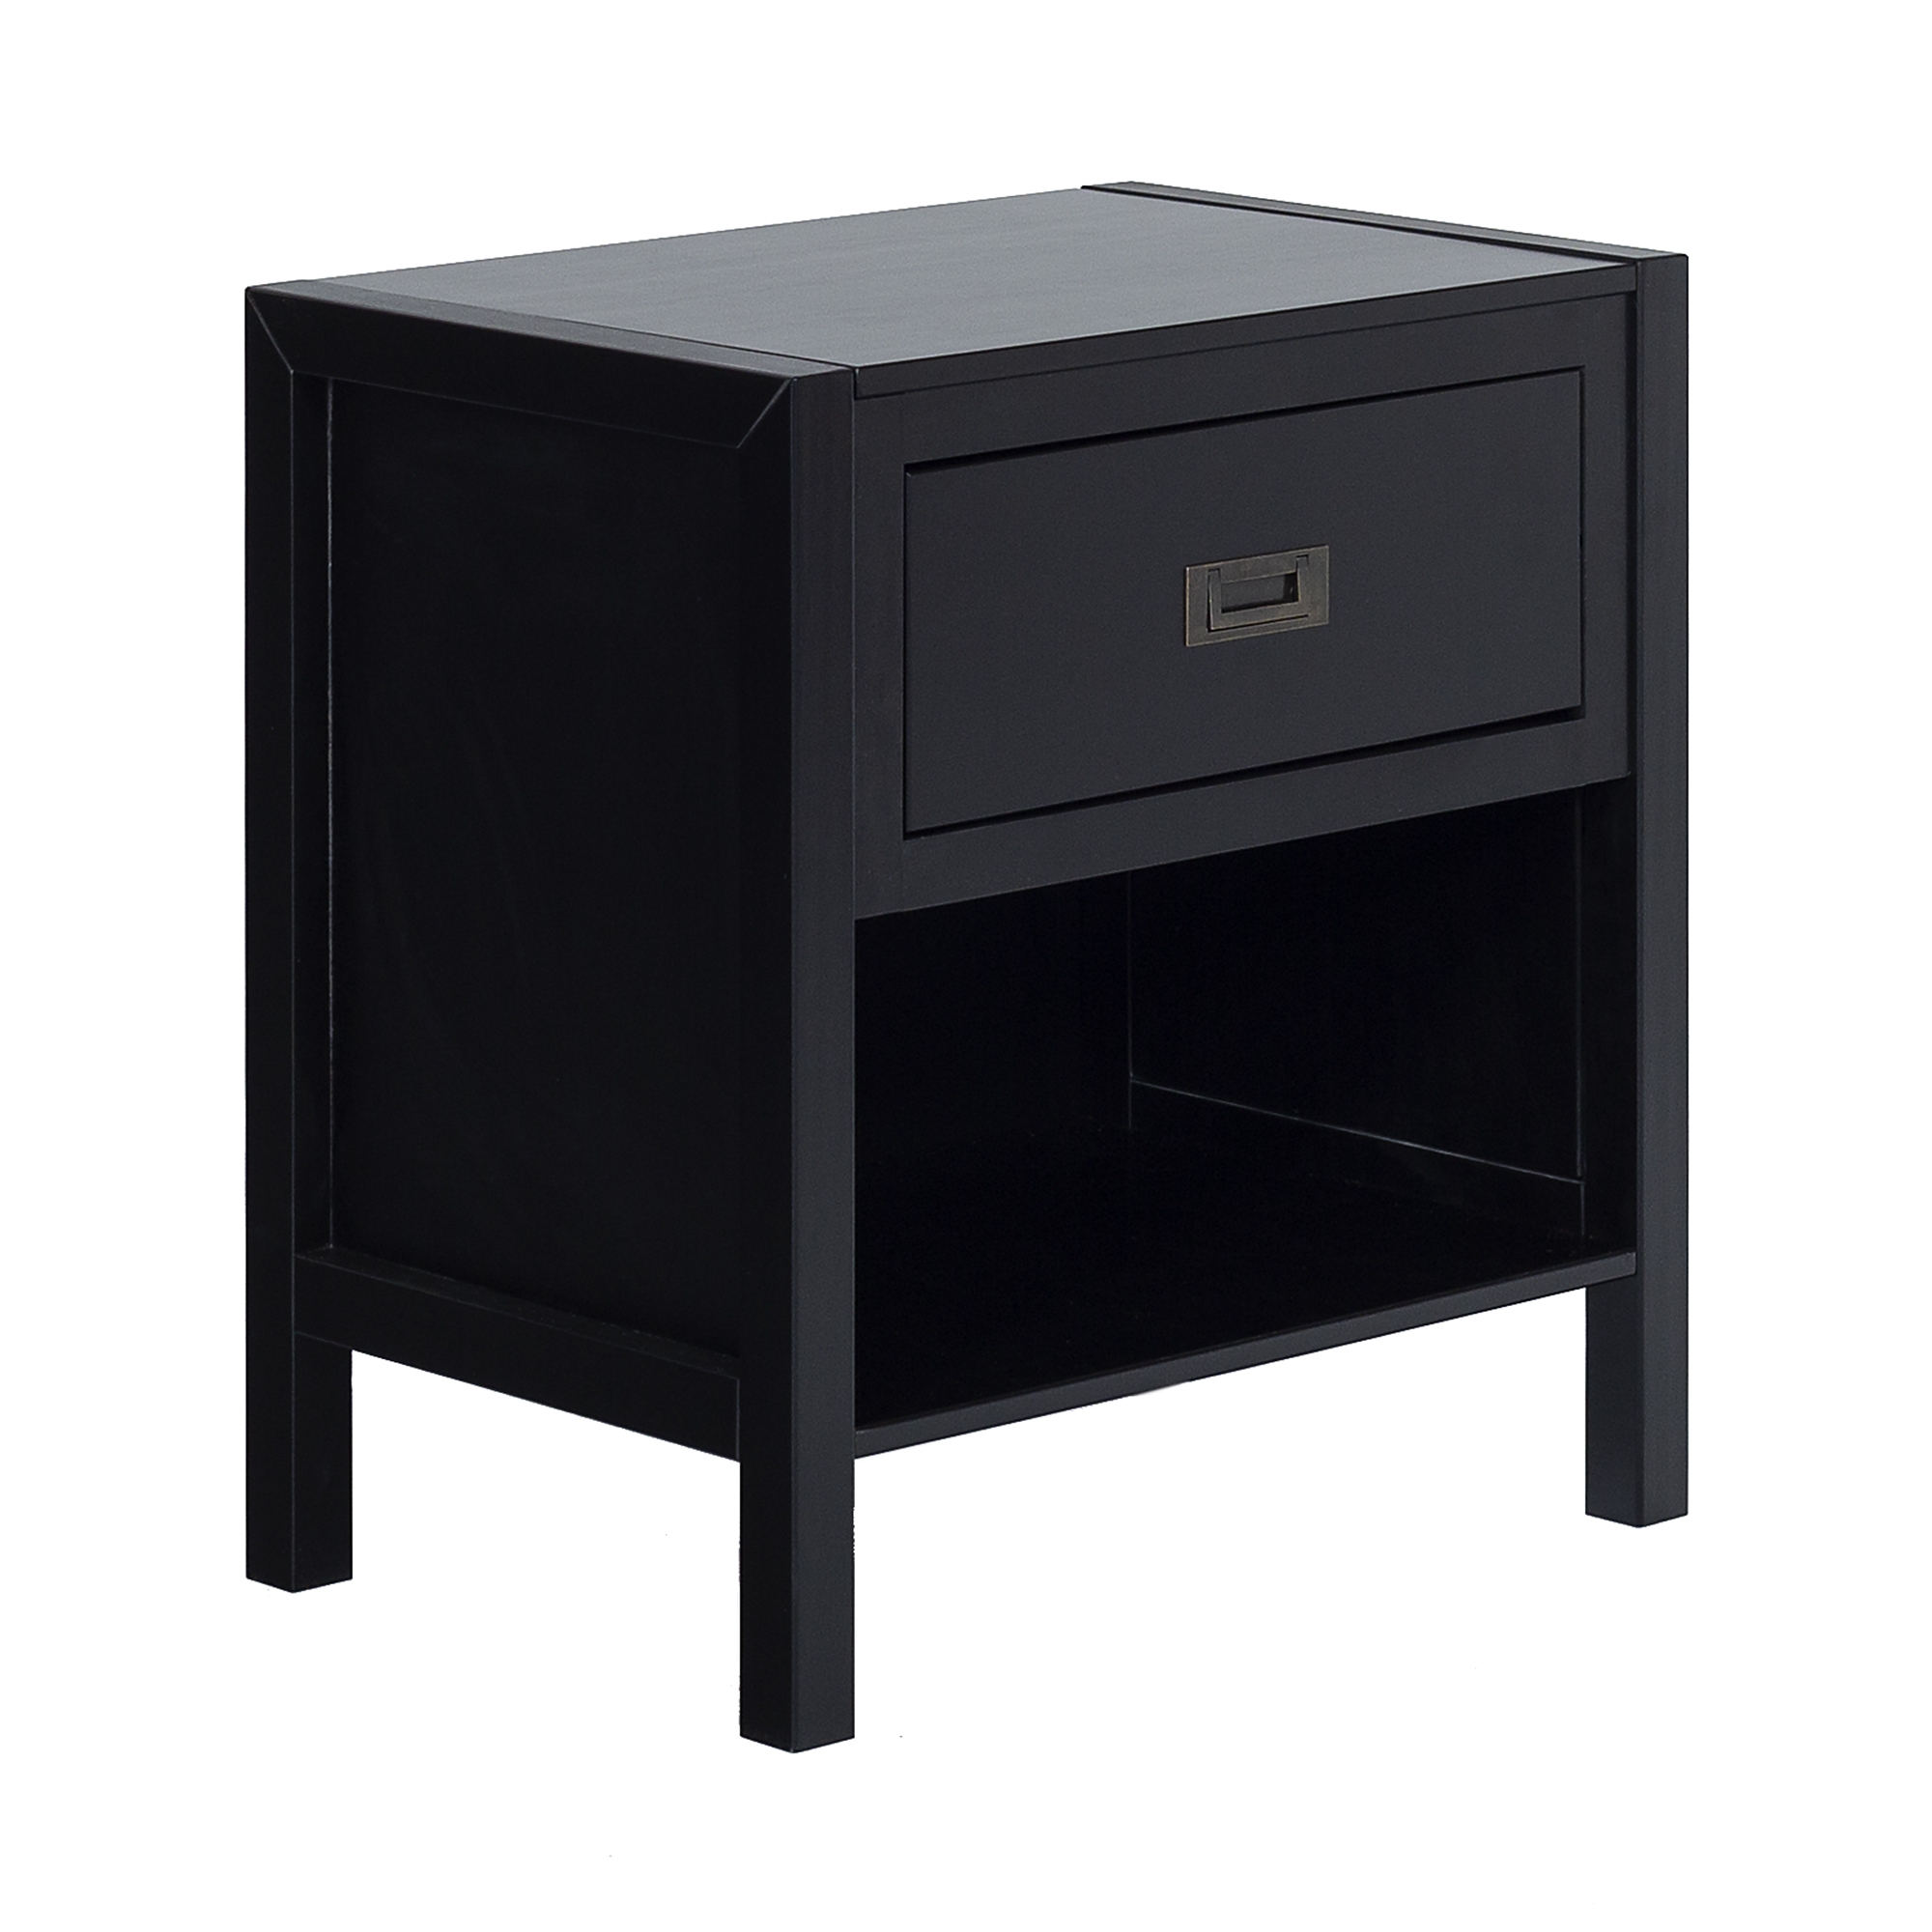 Lydia 1 Drawer Classic Solid Wood Nightstand - Black - Image 1